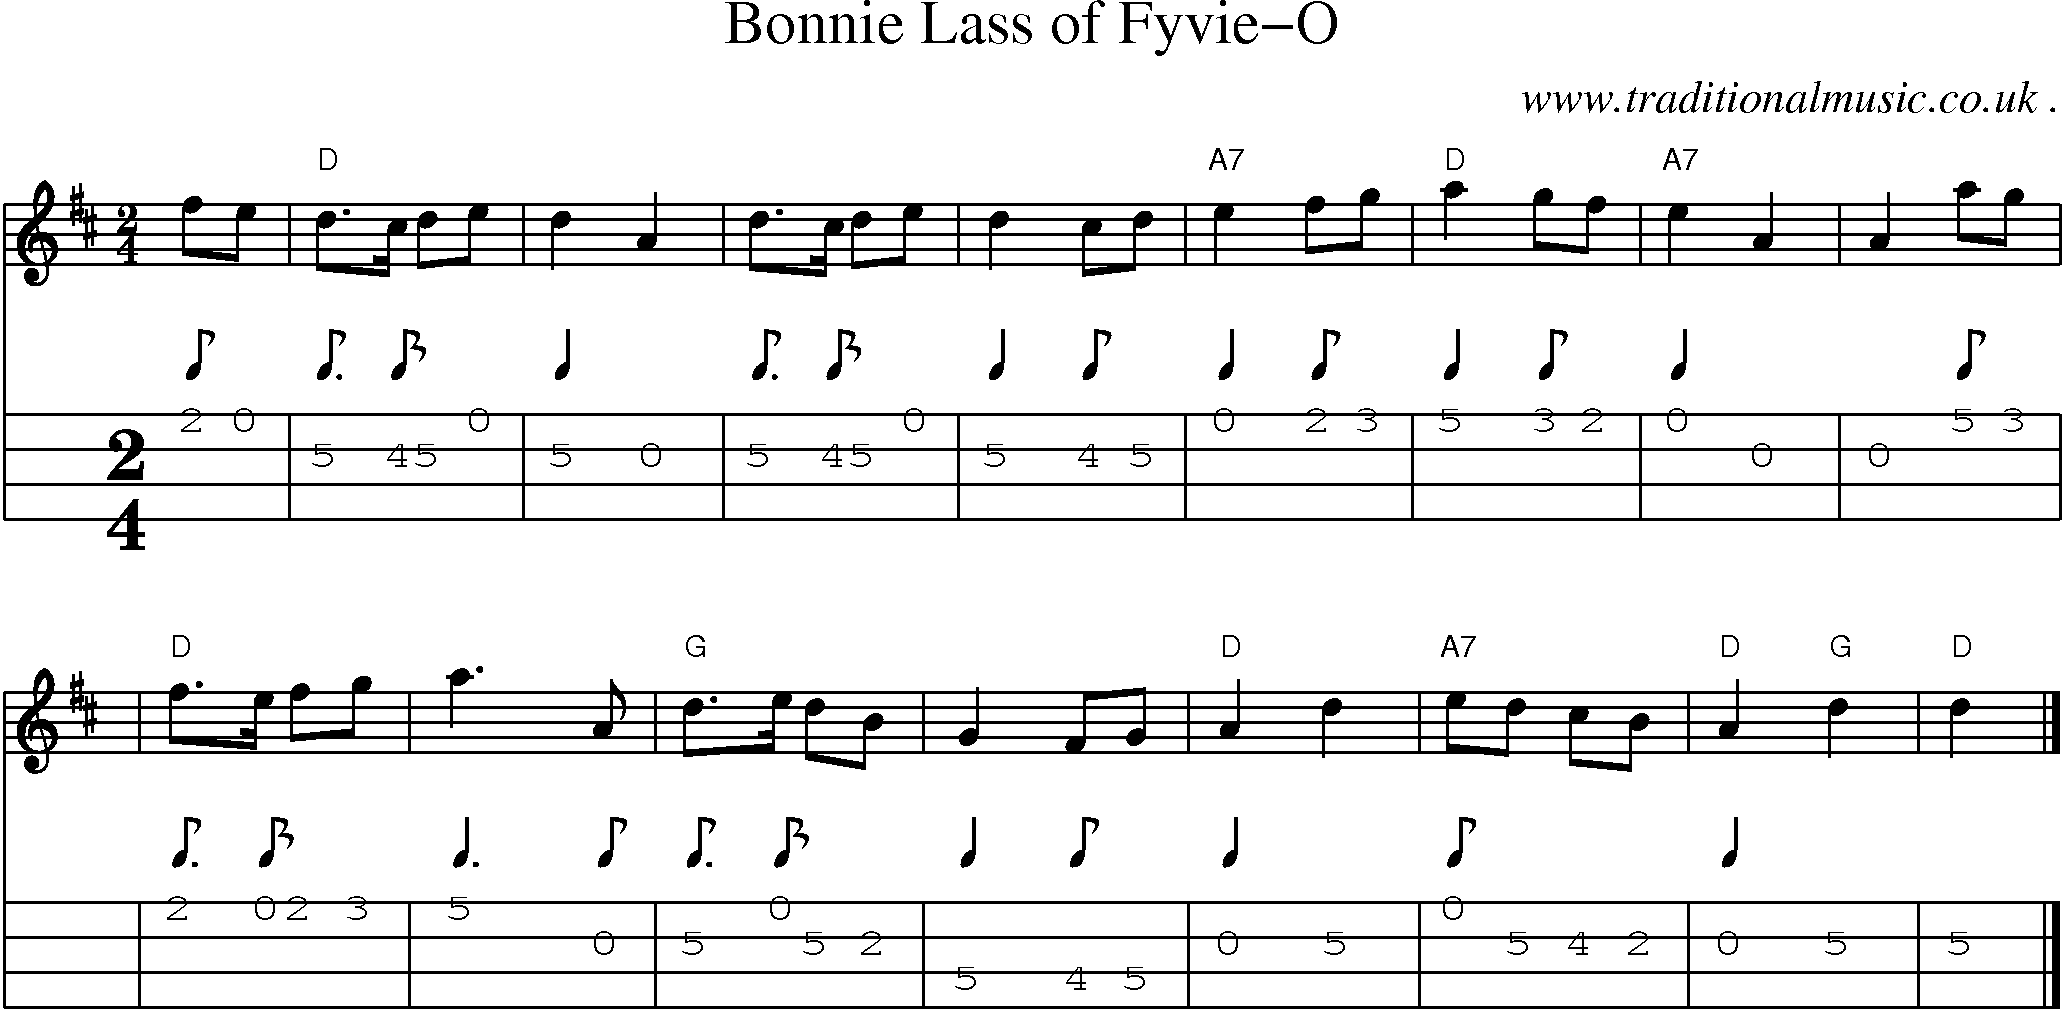 Sheet-music  score, Chords and Mandolin Tabs for Bonnie Lass Of Fyvie-o